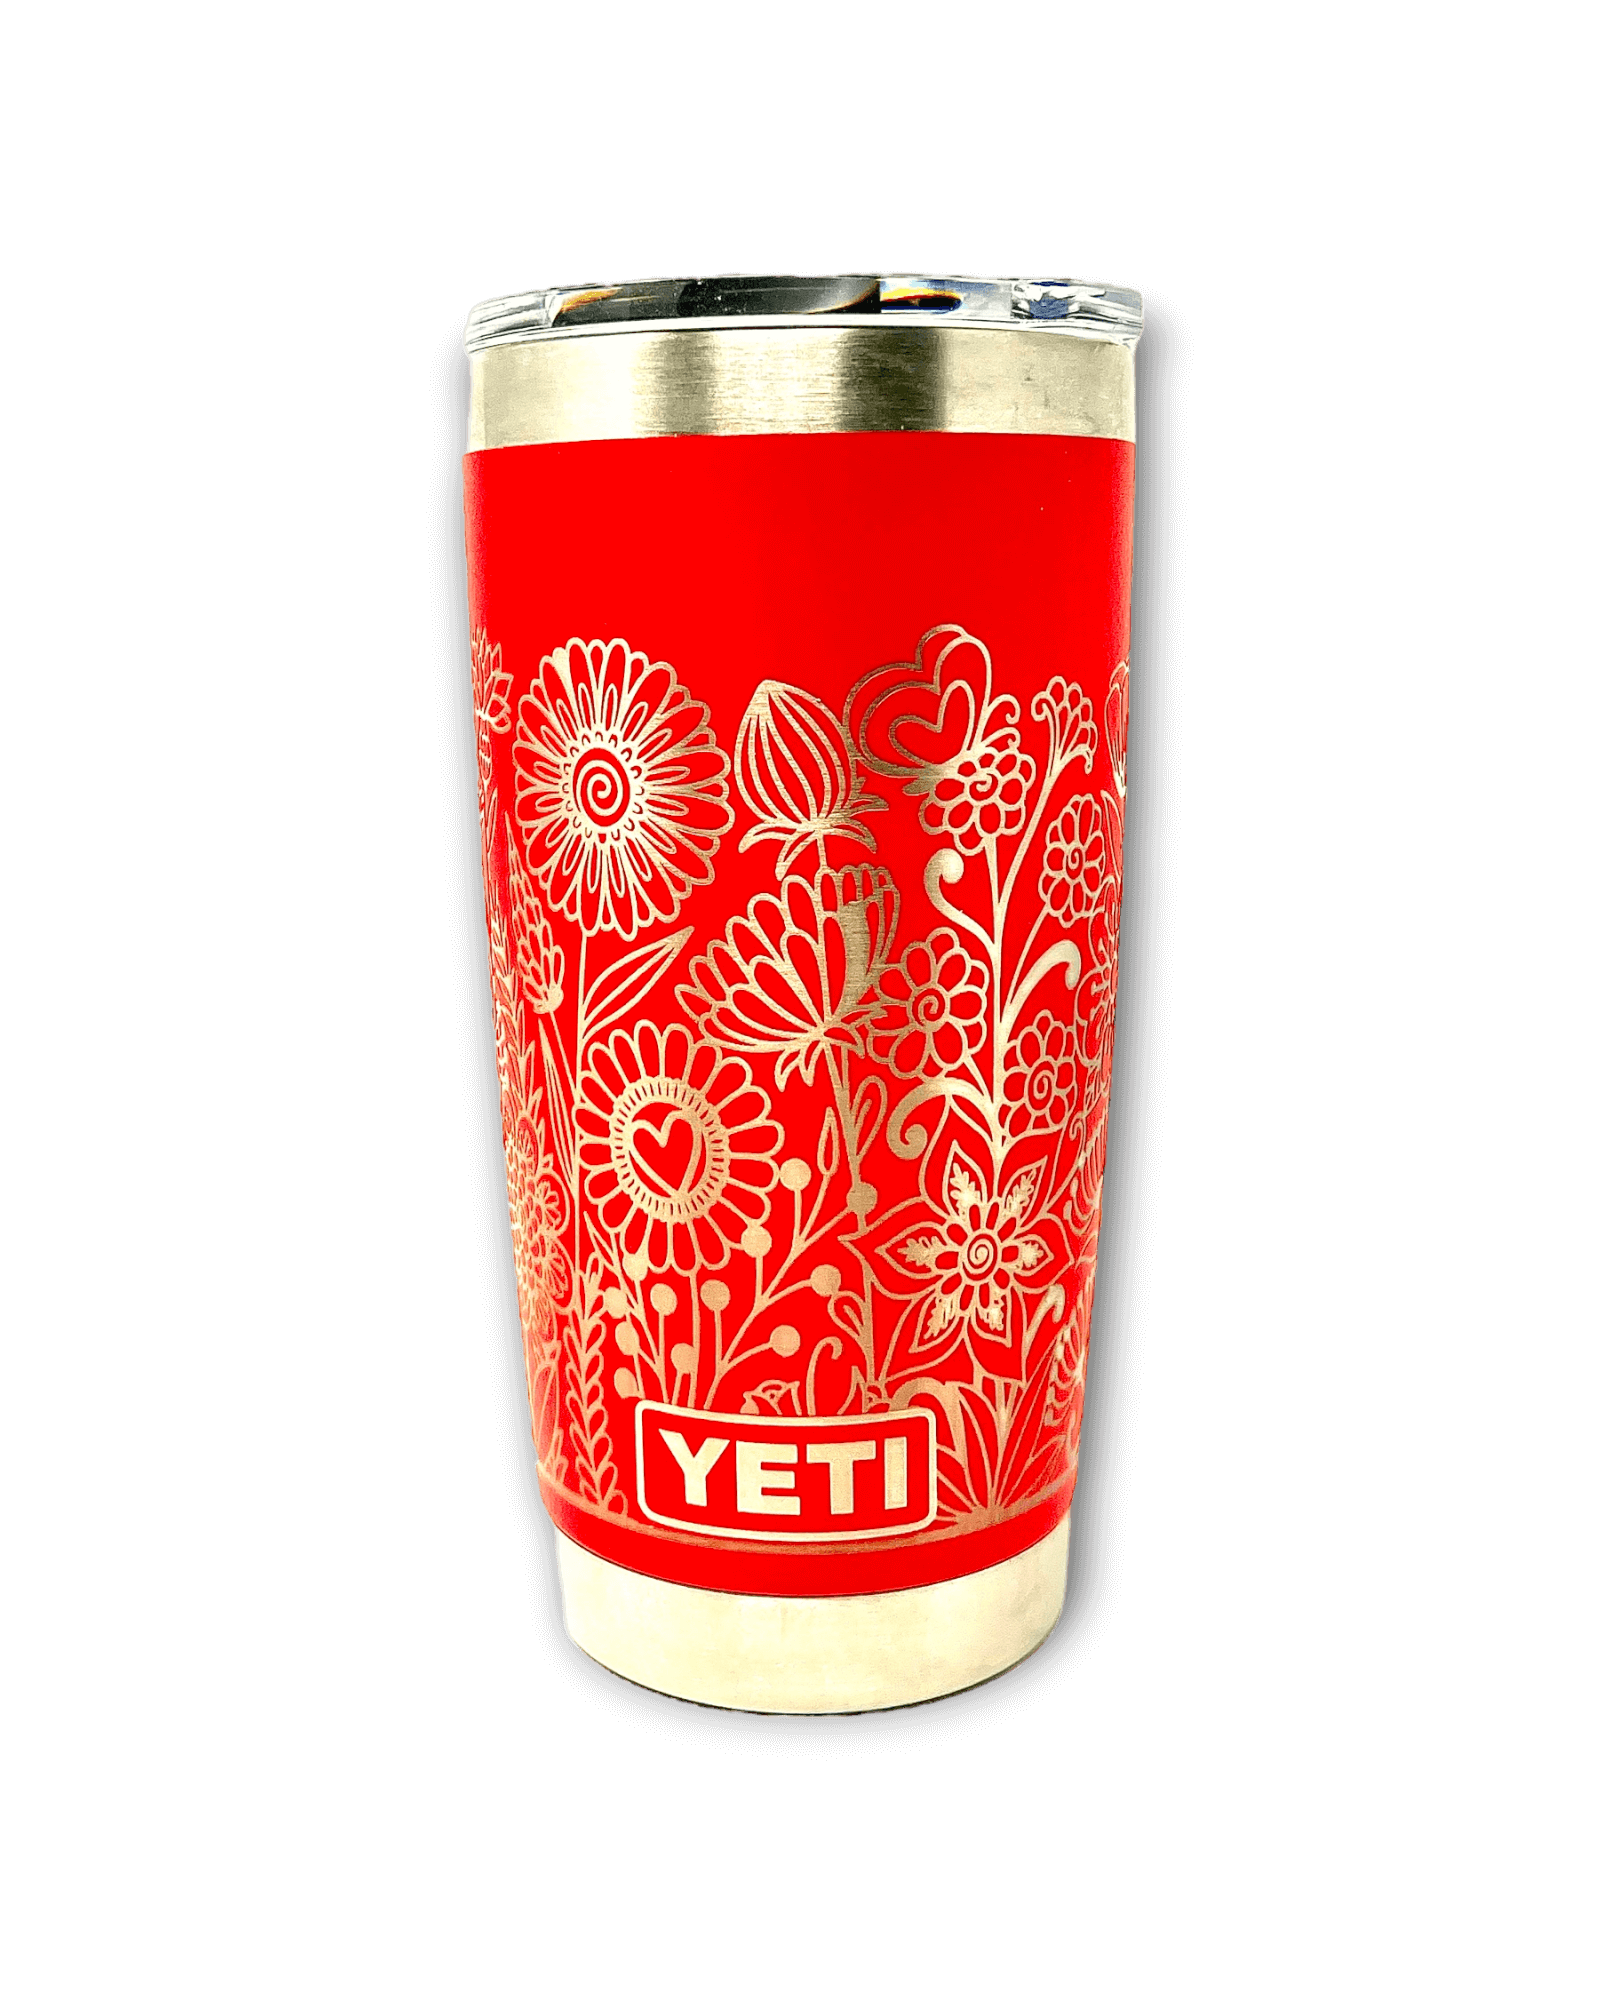 Get ready to take your cold-beverage game to a whole new flower-filled level with the Floral Wrap Yeti Rambler!